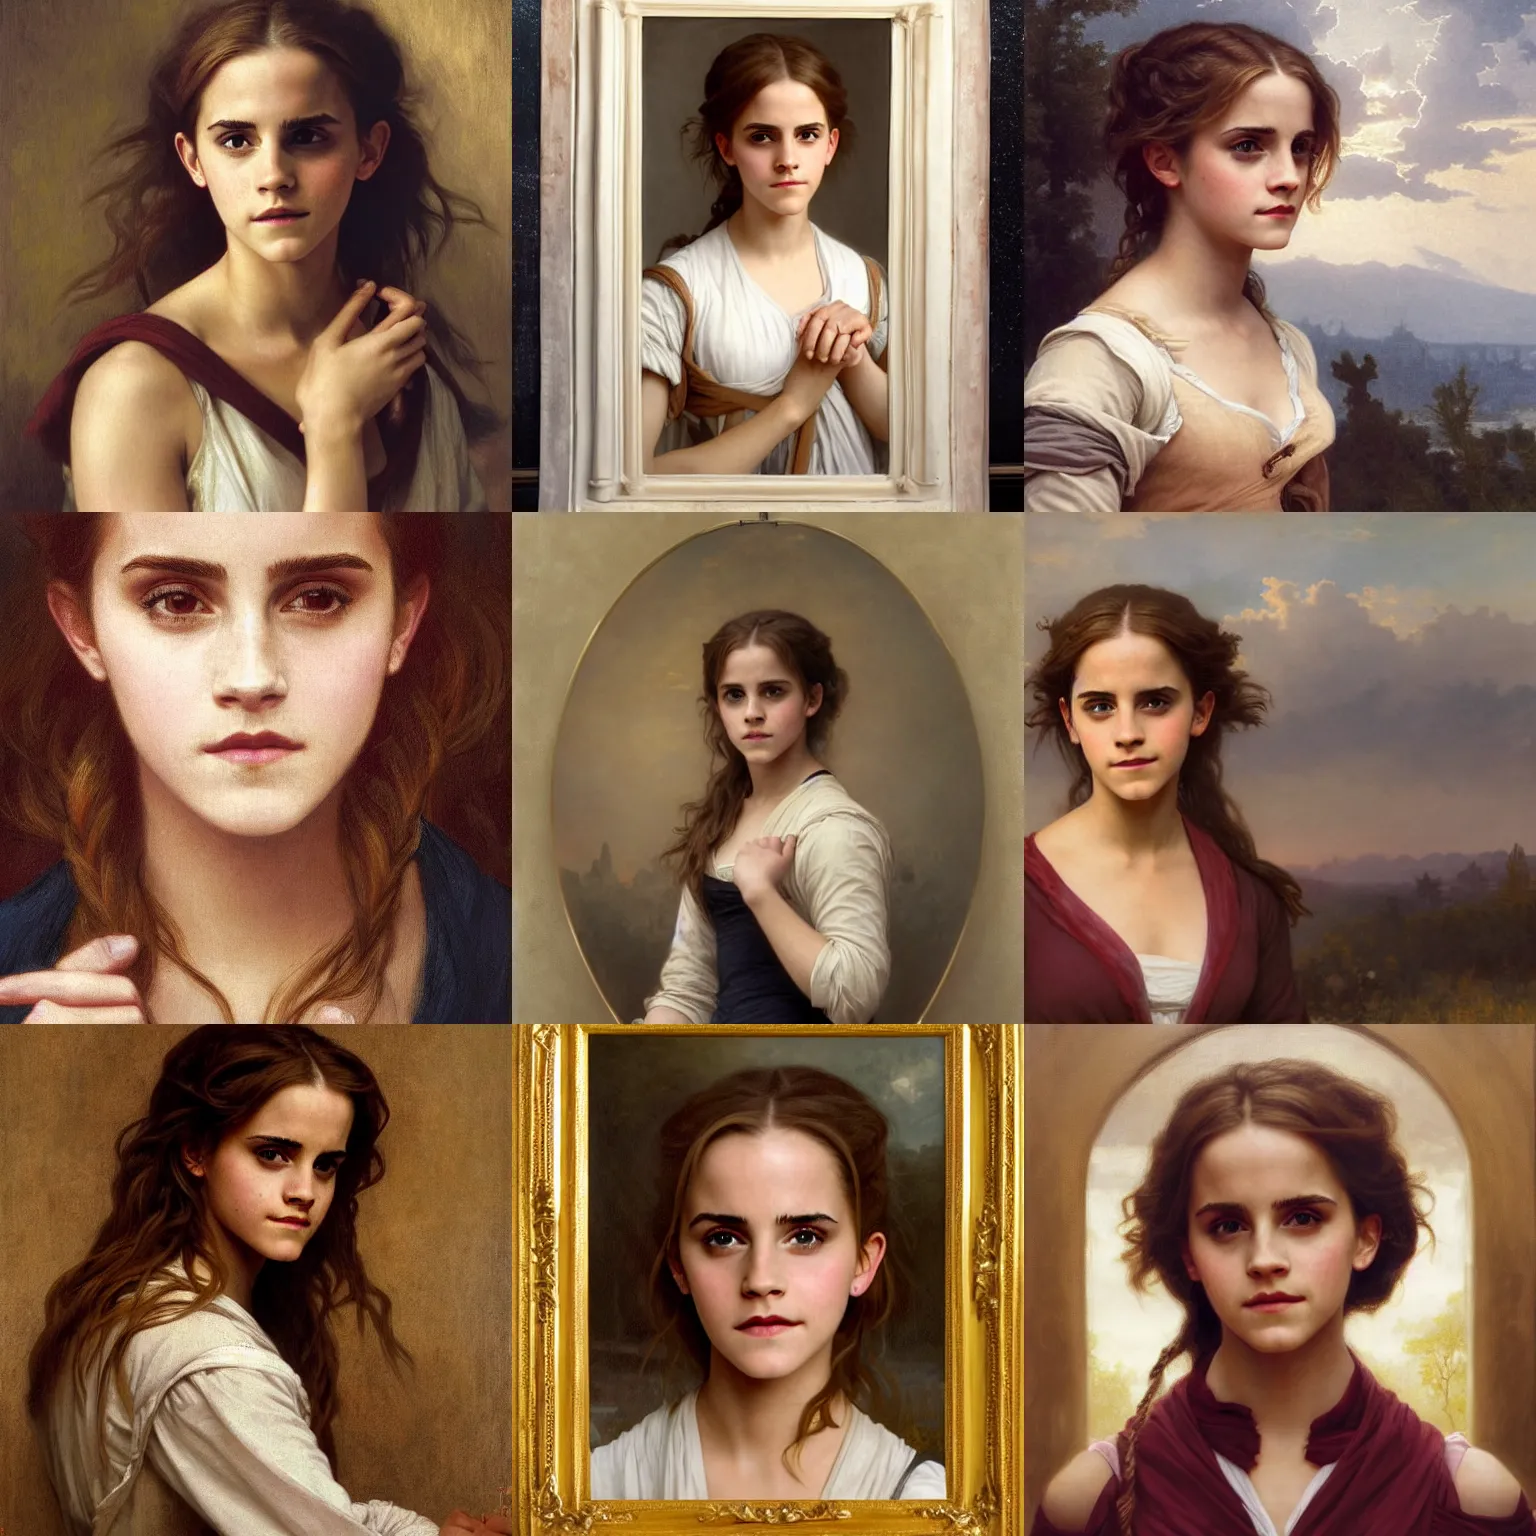 Prompt: Painting of Emma Watson as Hermione Granger, looking in mirror, she has a surprised expression on her face, her hand is on her waist, her other hand is touching her face. Art by william adolphe bouguereau. During golden hour. Extremely detailed. Beautiful. 4K. Award winning.